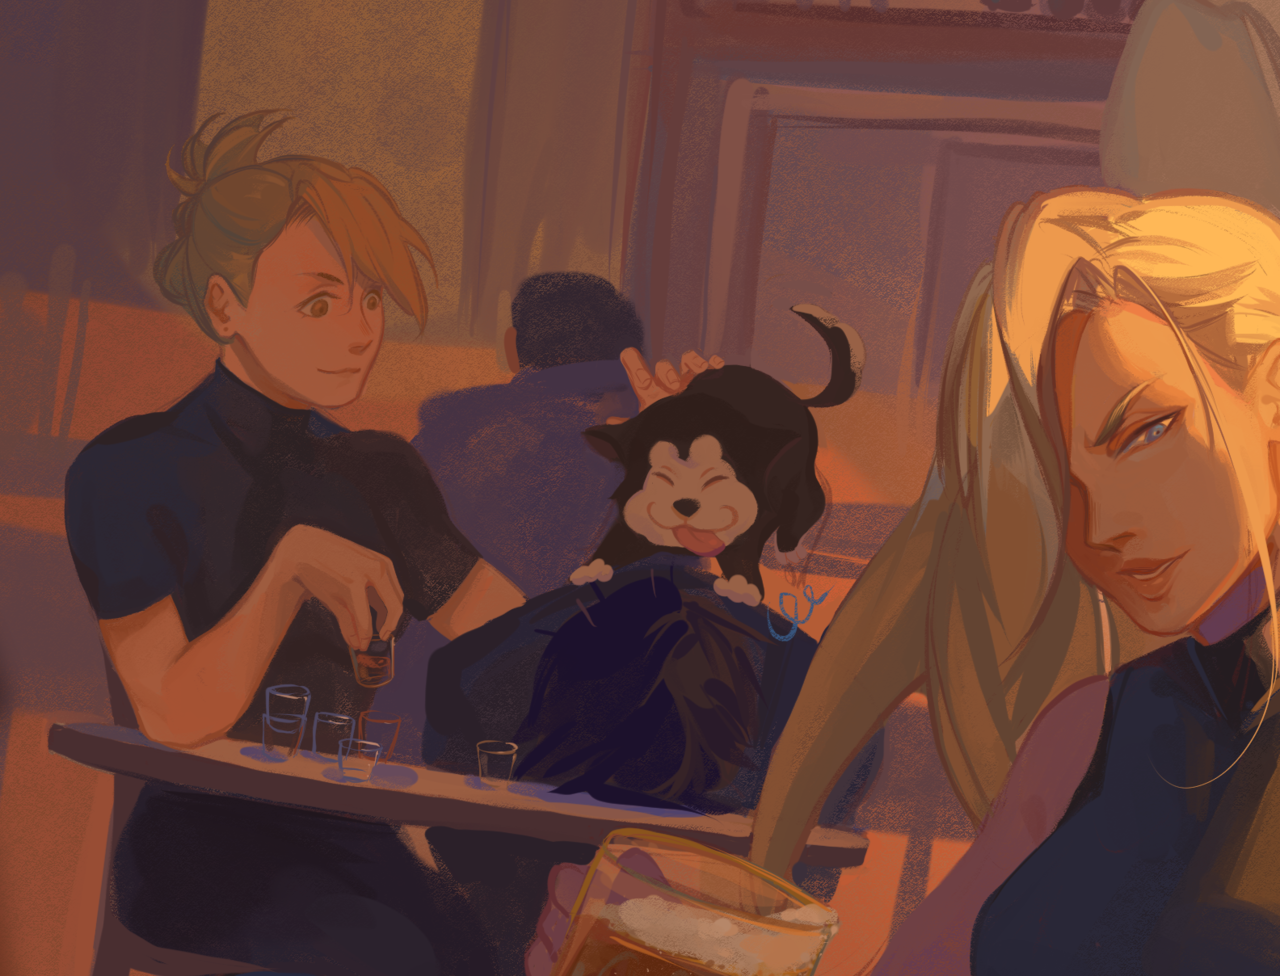 hanromi:
“ FMA After the fight - Wrestle!!
A more lighthearted scene featuring the gang when they’re not on duty!
”